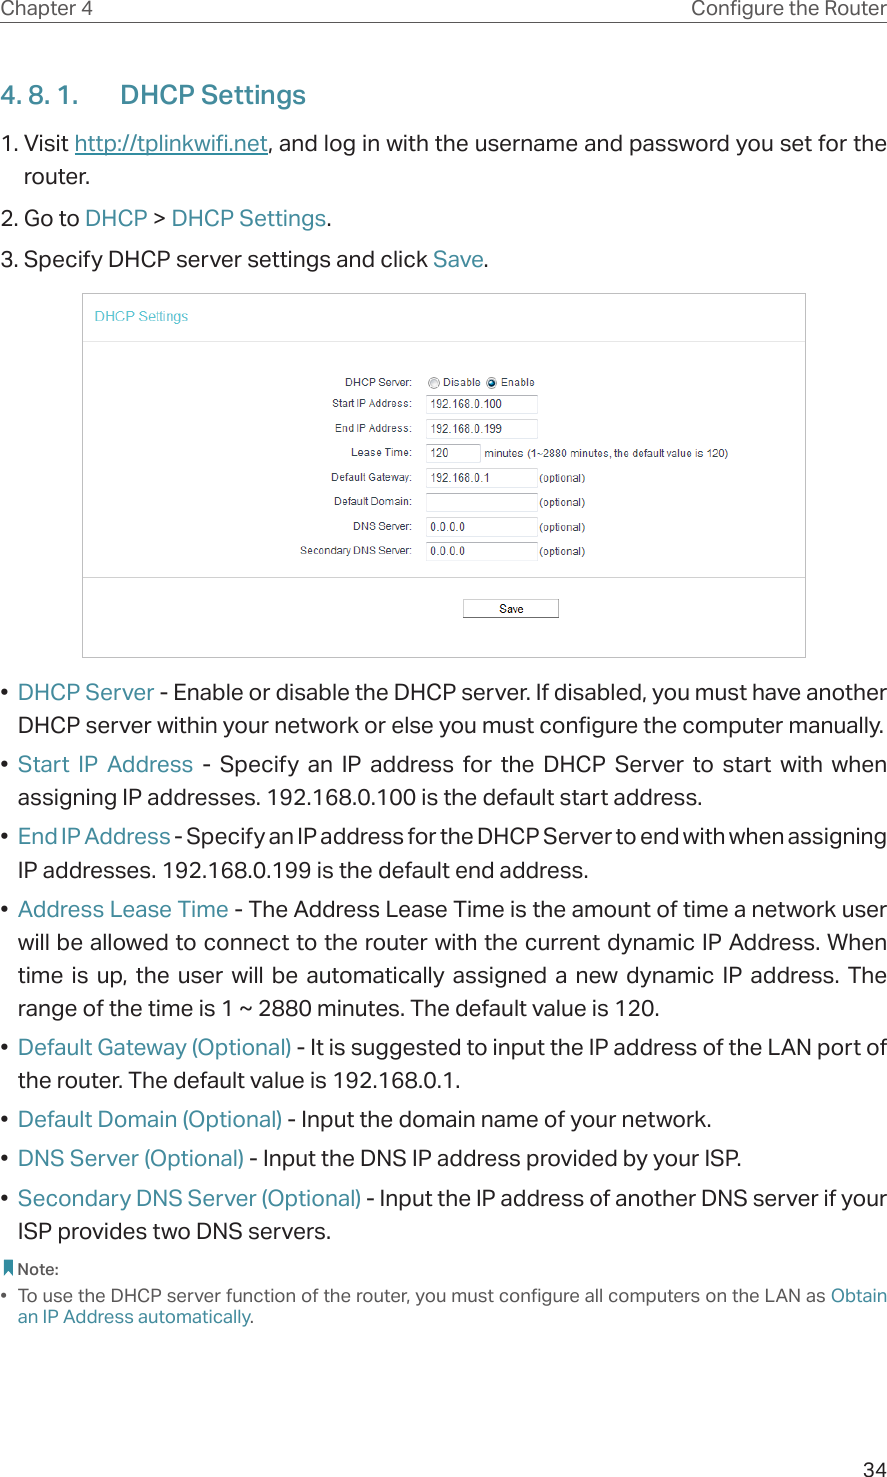 34Chapter 4 &amp;RQƮJXUHWKH5RXWHU4. 8. 1.  DHCP Settings1. Visit http://tplinkwifi.net, and log in with the username and password you set for the router.2. Go to DHCP &gt; DHCP Settings. 3. Specify DHCP server settings and click Save.•  DHCP Server - Enable or disable the DHCP server. If disabled, you must have another DHCP server within your network or else you must configure the computer manually.•  Start IP Address - Specify an IP address for the DHCP Server to start with when assigning IP addresses. 192.168.0.100 is the default start address.•  End IP Address - Specify an IP address for the DHCP Server to end with when assigning IP addresses. 192.168.0.199 is the default end address.•  Address Lease Time - The Address Lease Time is the amount of time a network user will be allowed to connect to the router with the current dynamic IP Address. When time is up, the user will be automatically assigned a new dynamic IP address. The range of the time is 1 ~ 2880 minutes. The default value is 120.•  Default Gateway (Optional) - It is suggested to input the IP address of the LAN port of the router. The default value is 192.168.0.1.•  Default Domain (Optional) - Input the domain name of your network.•  DNS Server (Optional) - Input the DNS IP address provided by your ISP.•  Secondary DNS Server (Optional) - Input the IP address of another DNS server if your ISP provides two DNS servers. Note:•  To use the DHCP server function of the router, you must configure all computers on the LAN as Obtain an IP Address automatically.